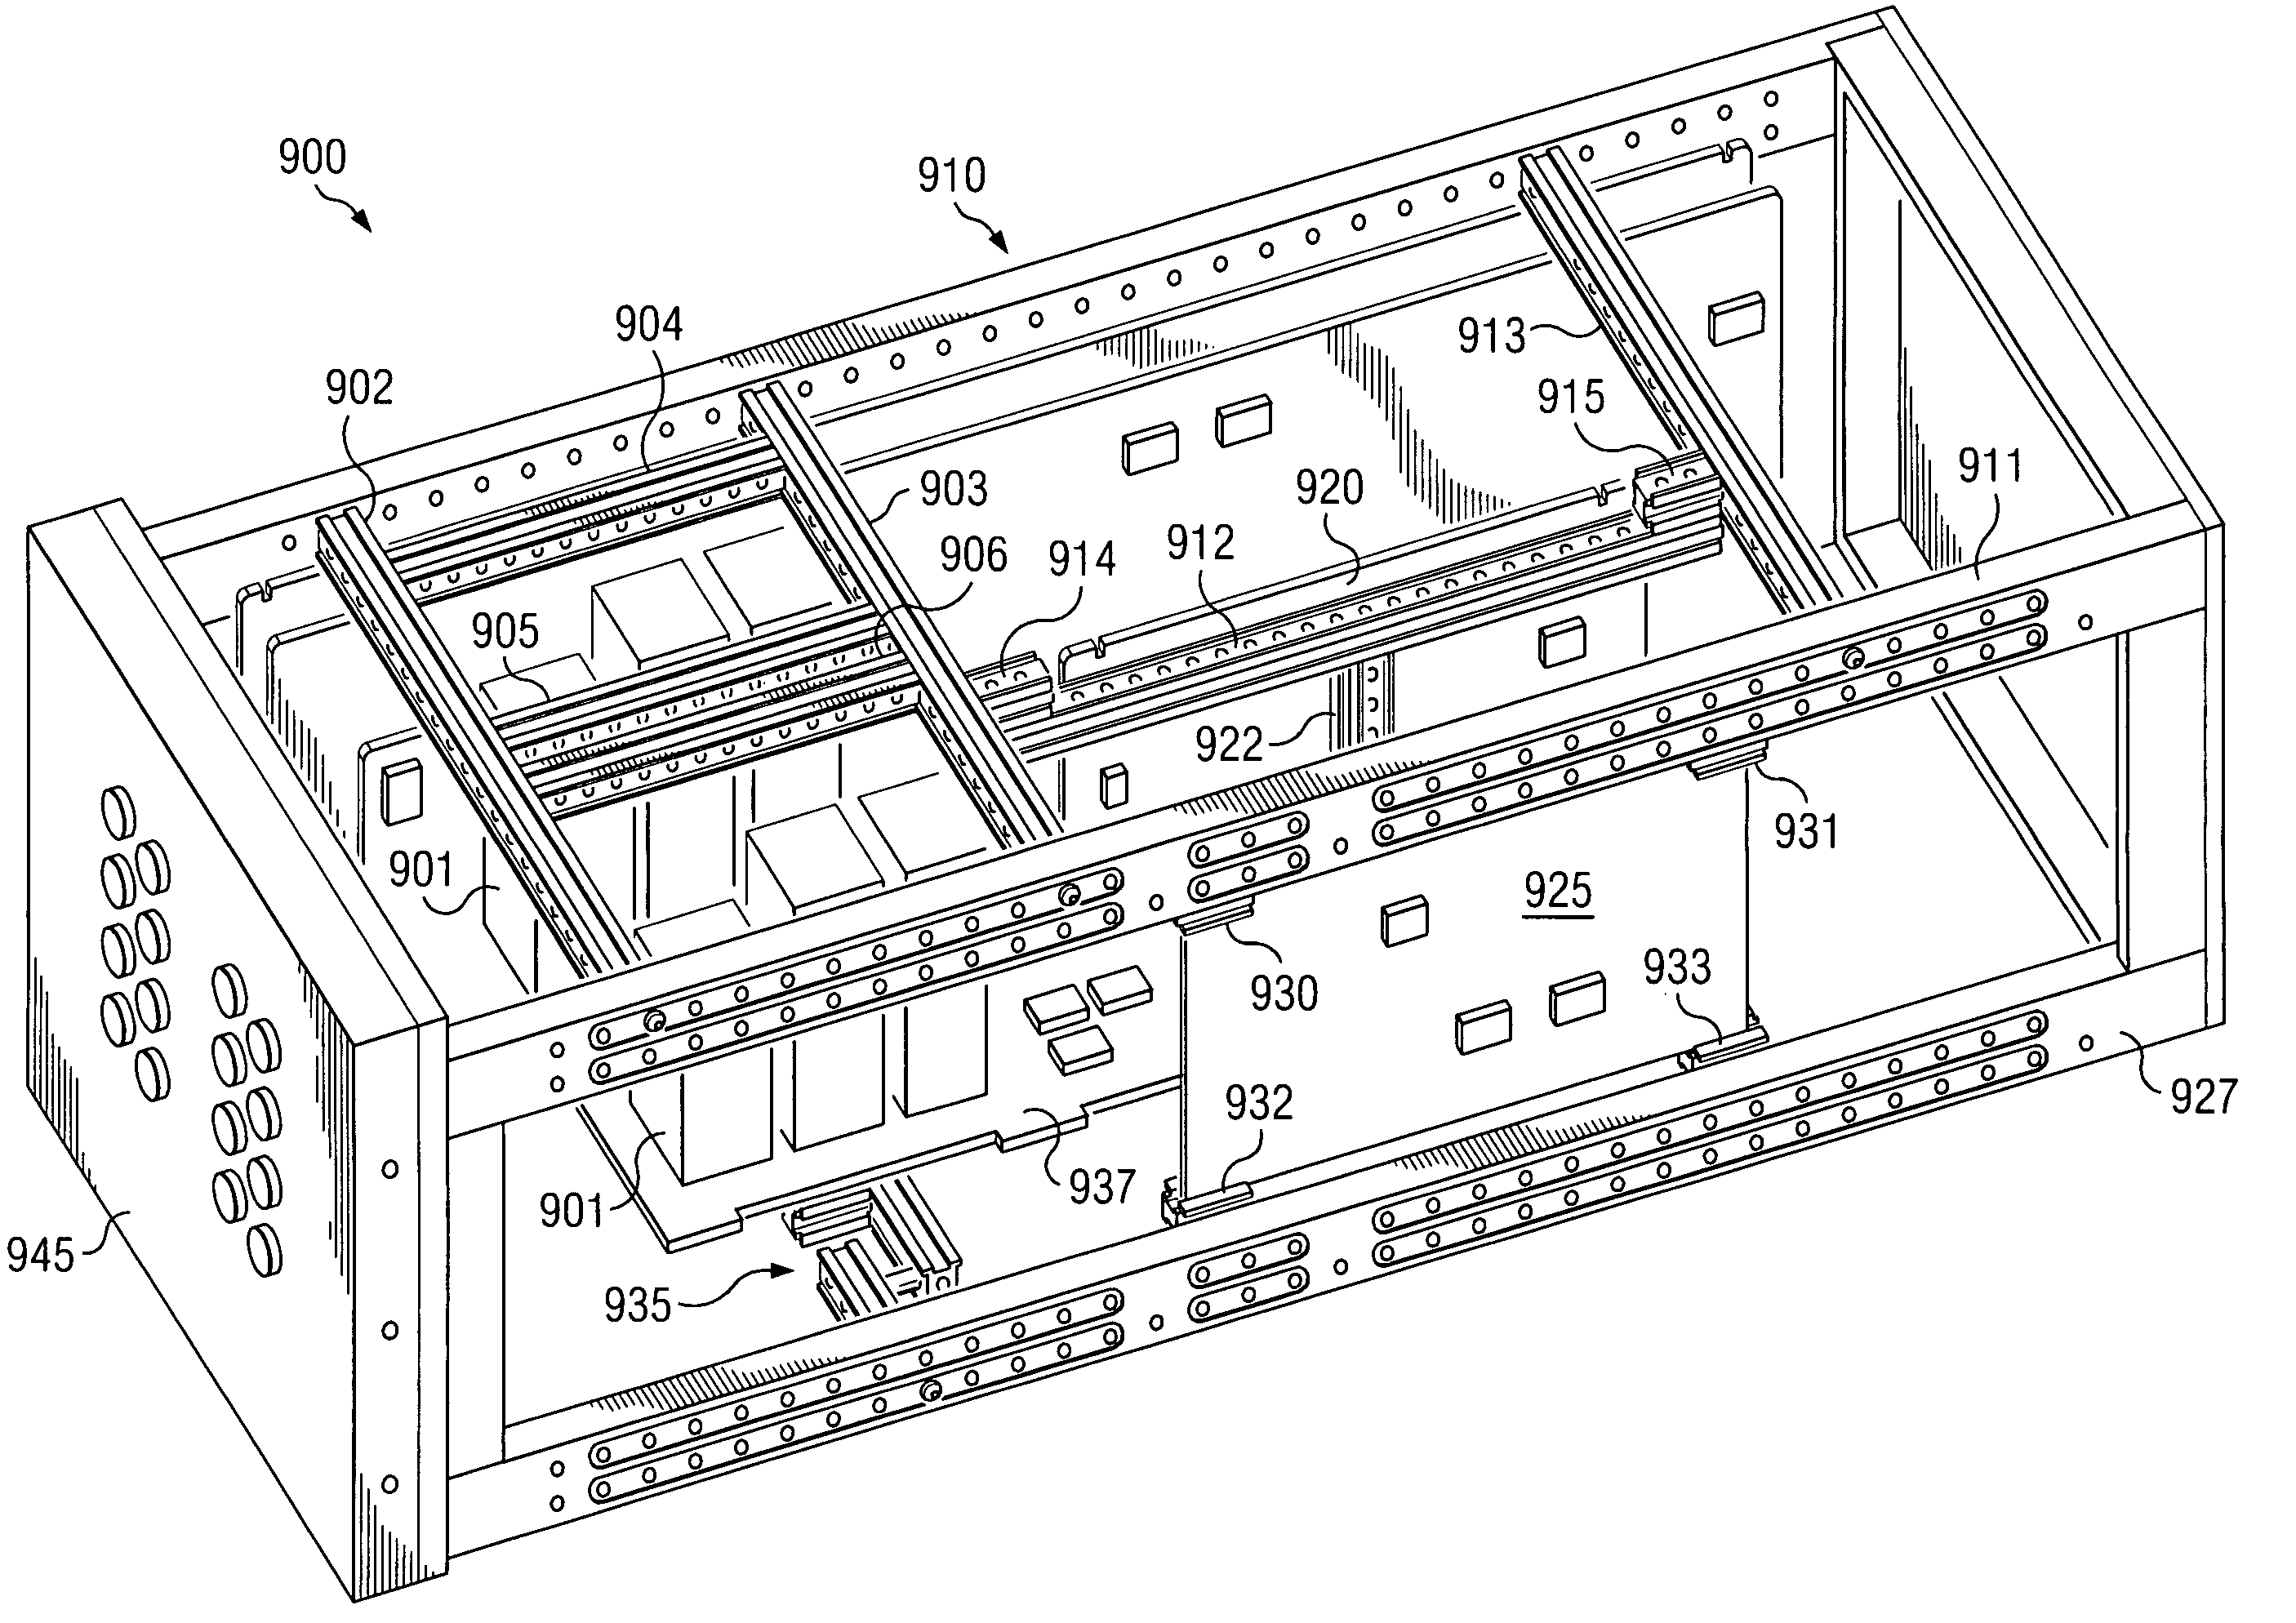 Systems and methods for modular instrument design and fabrication